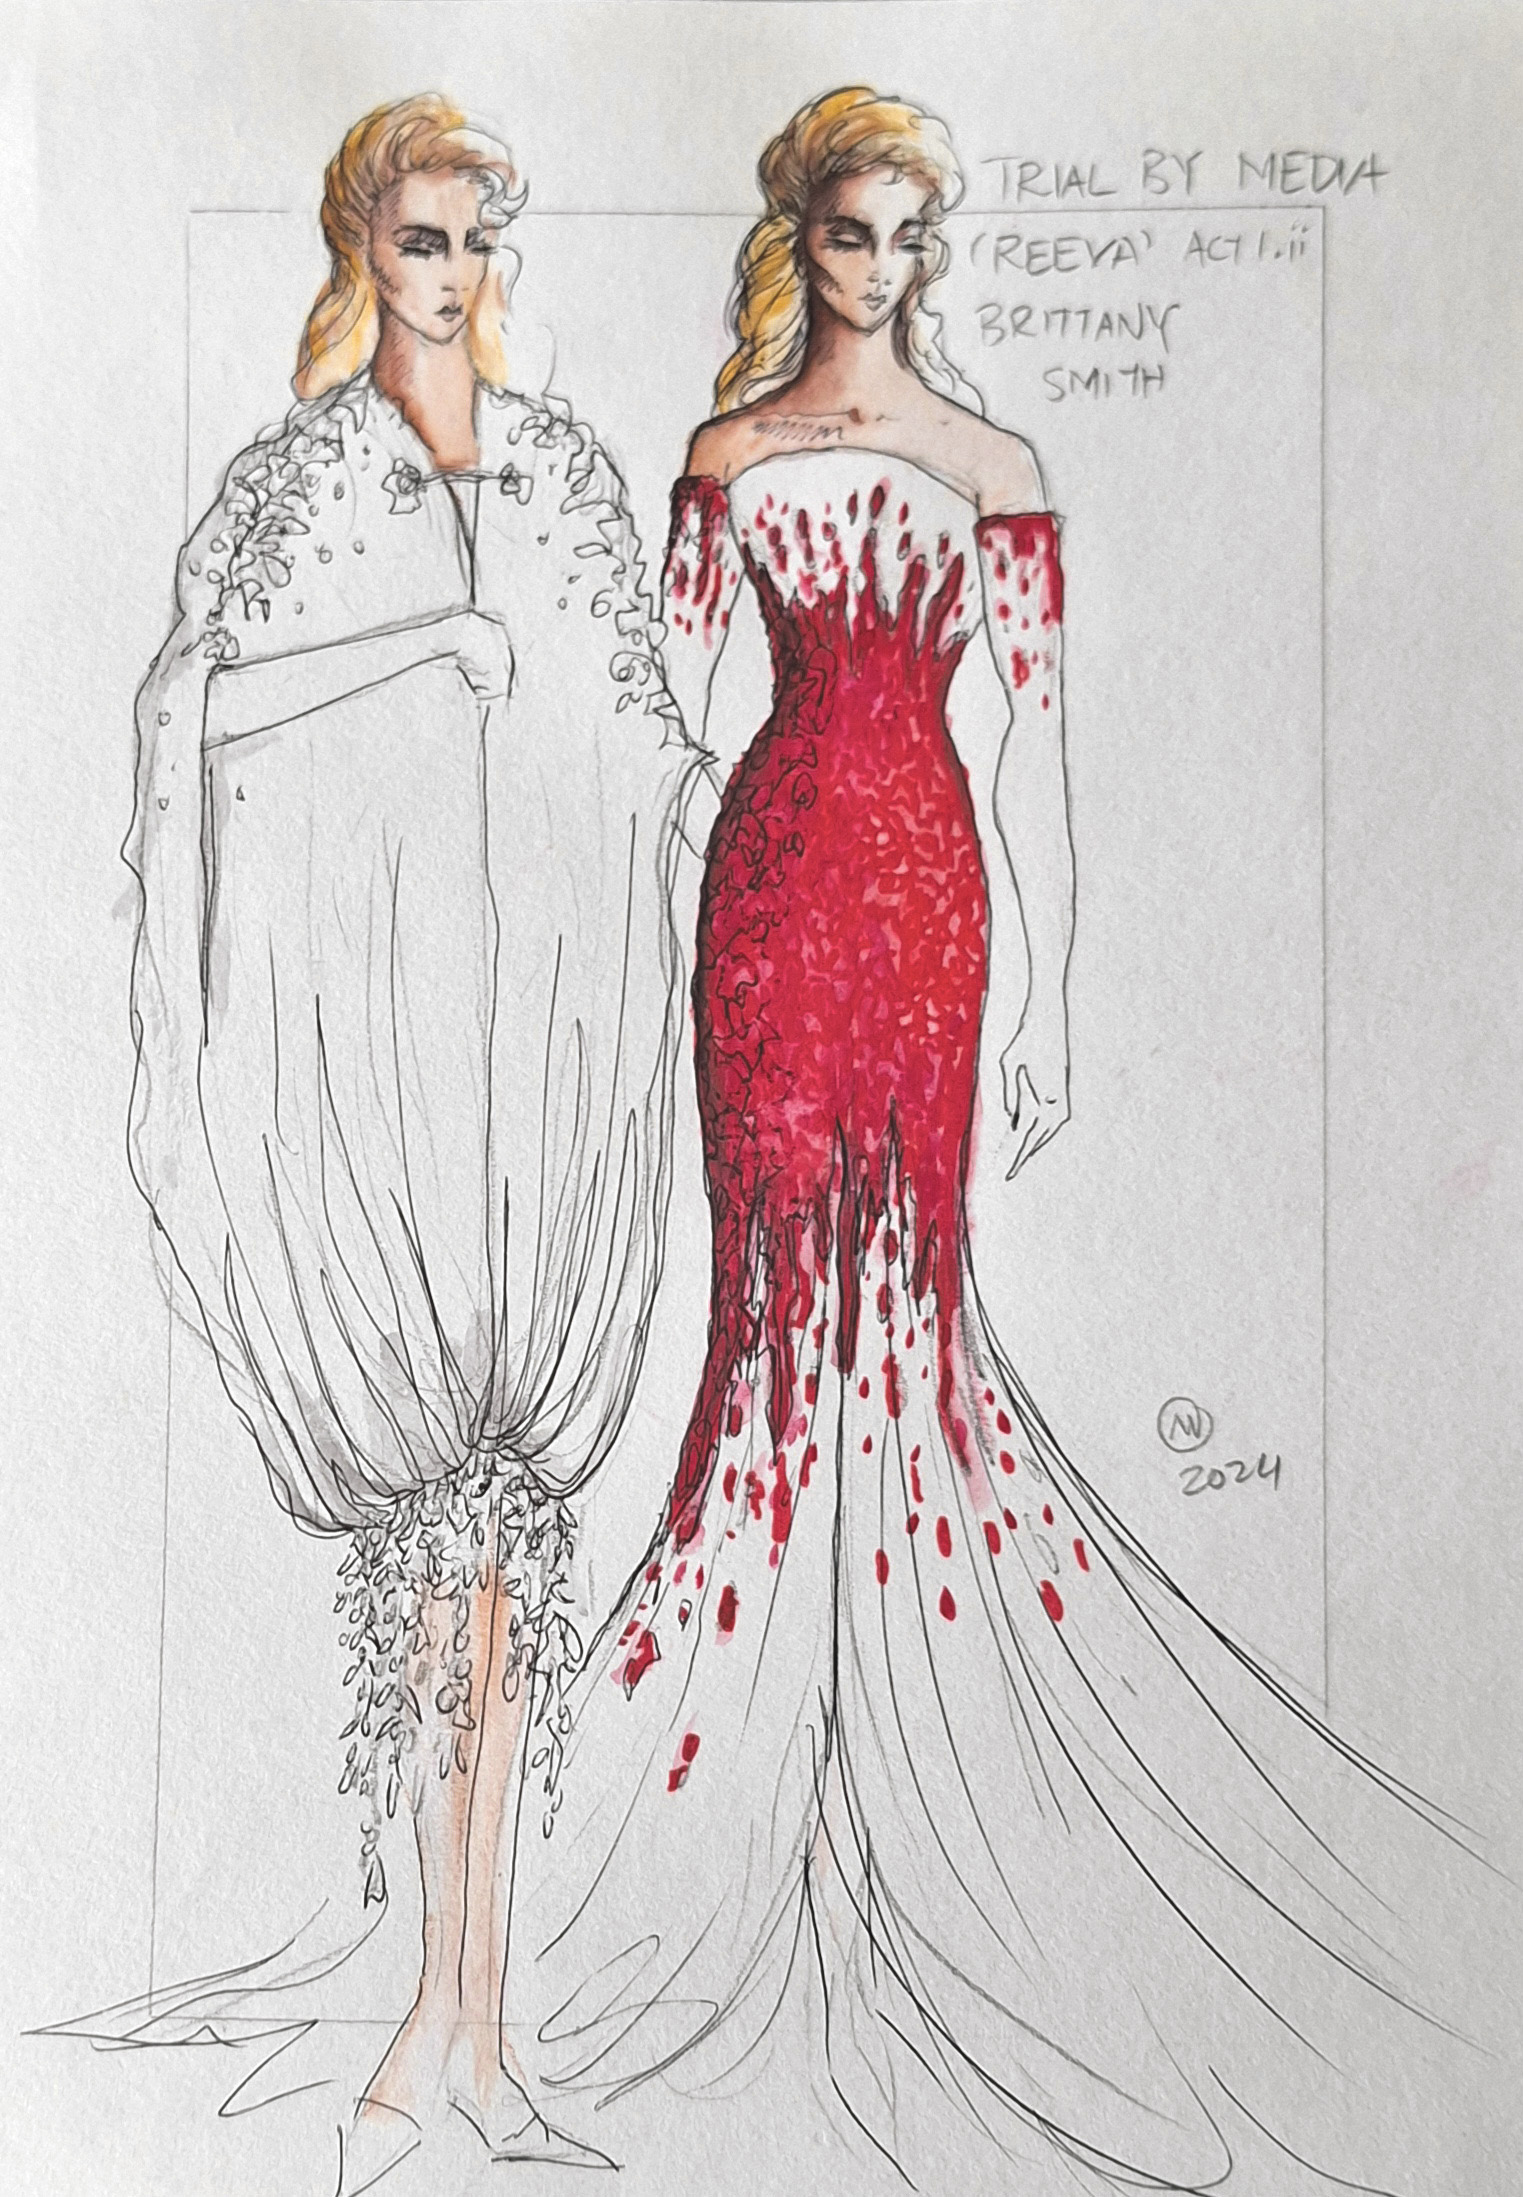 Costume renderings by Marcel Meyer for Brittany Smith as Reeva